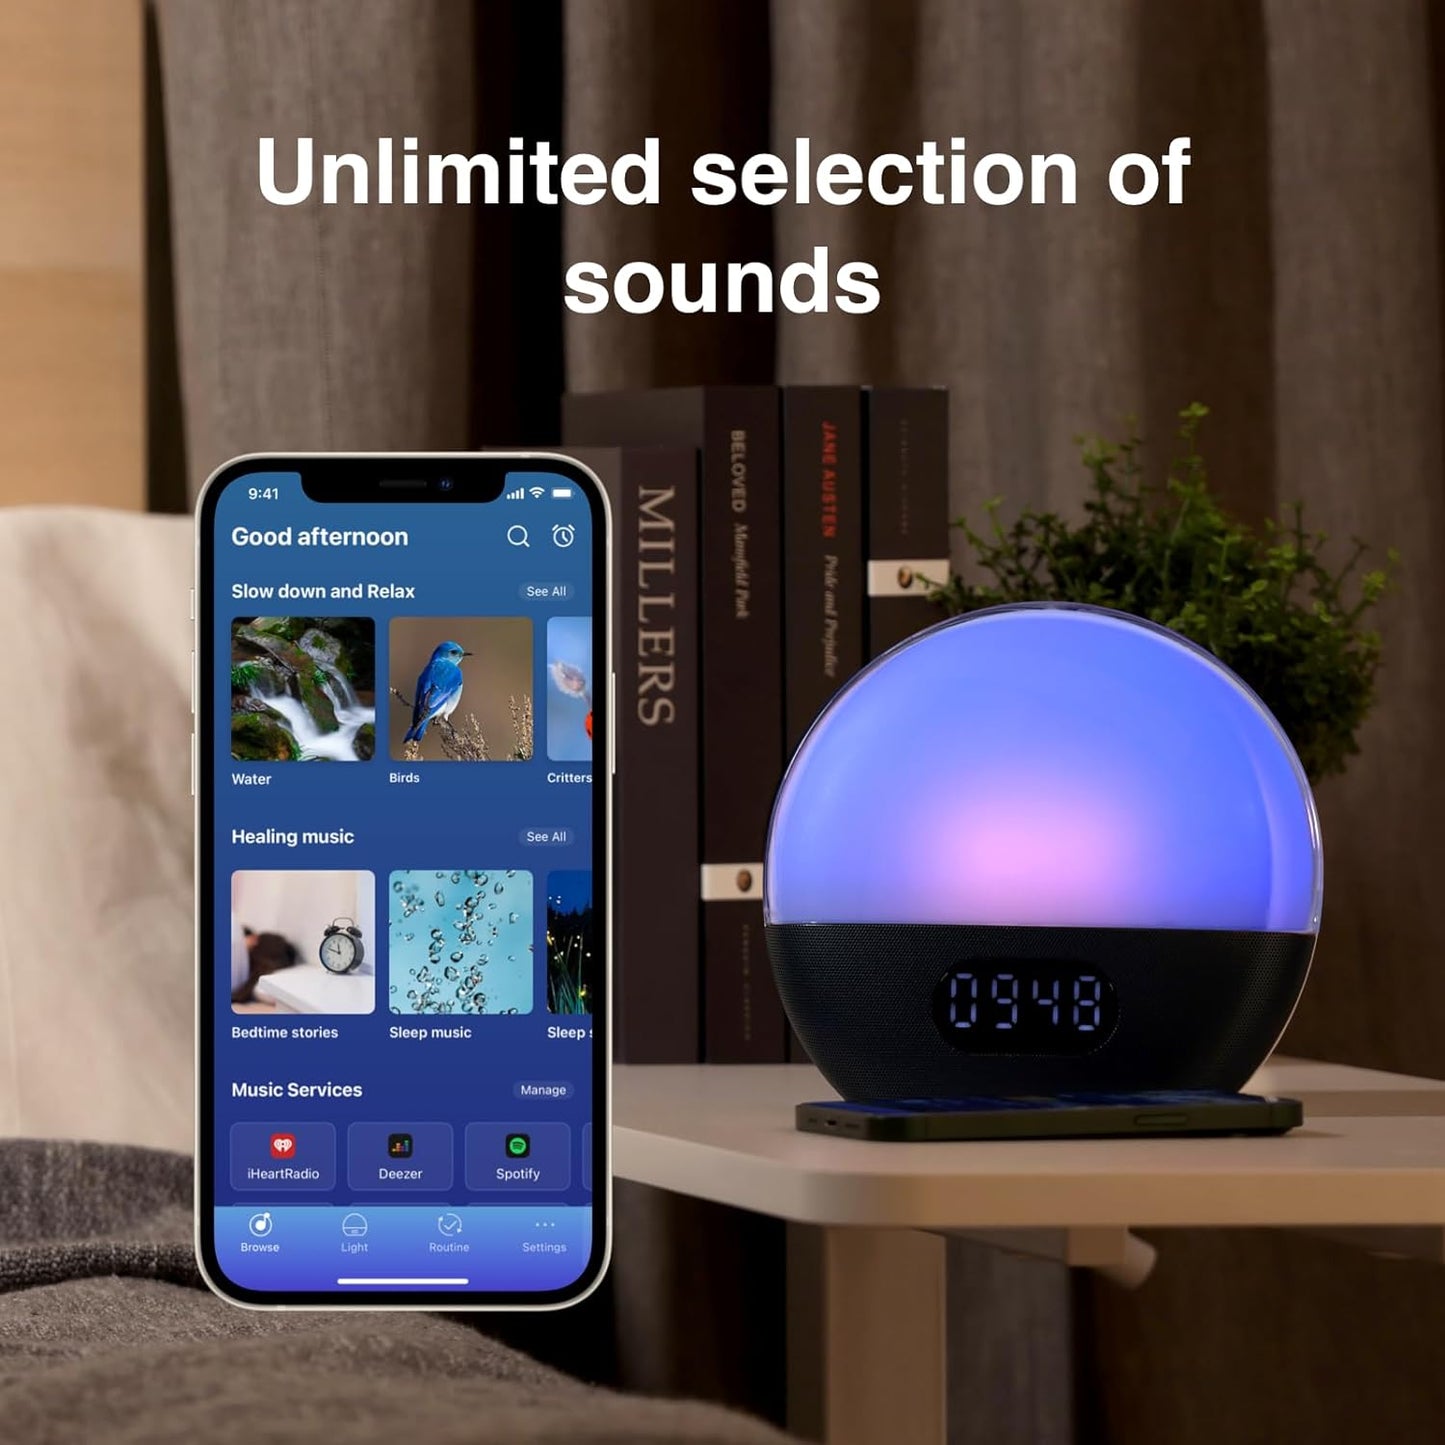 WiiM Wake-up Light, Alexa Built-in, Unlimited Sound Choices, All-in-One Sunrise Alarm Clock, Sound Machine, Sleep Routines and More -Sea Blue Green (Sea Blue Green)